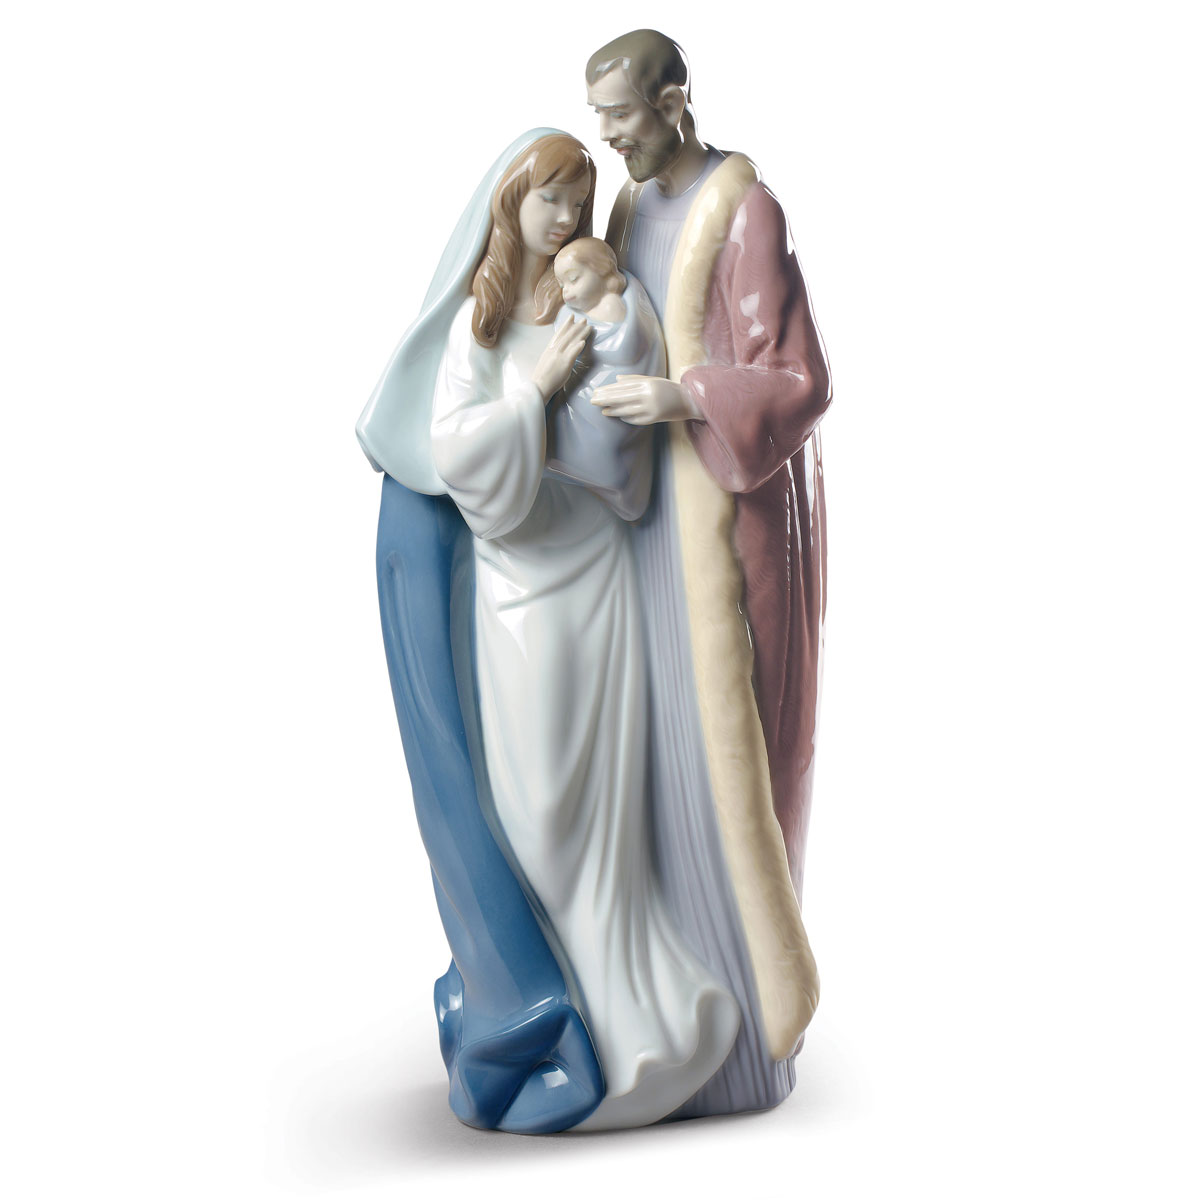 Lladro Classic Sculpture, Blessed Family Figurine